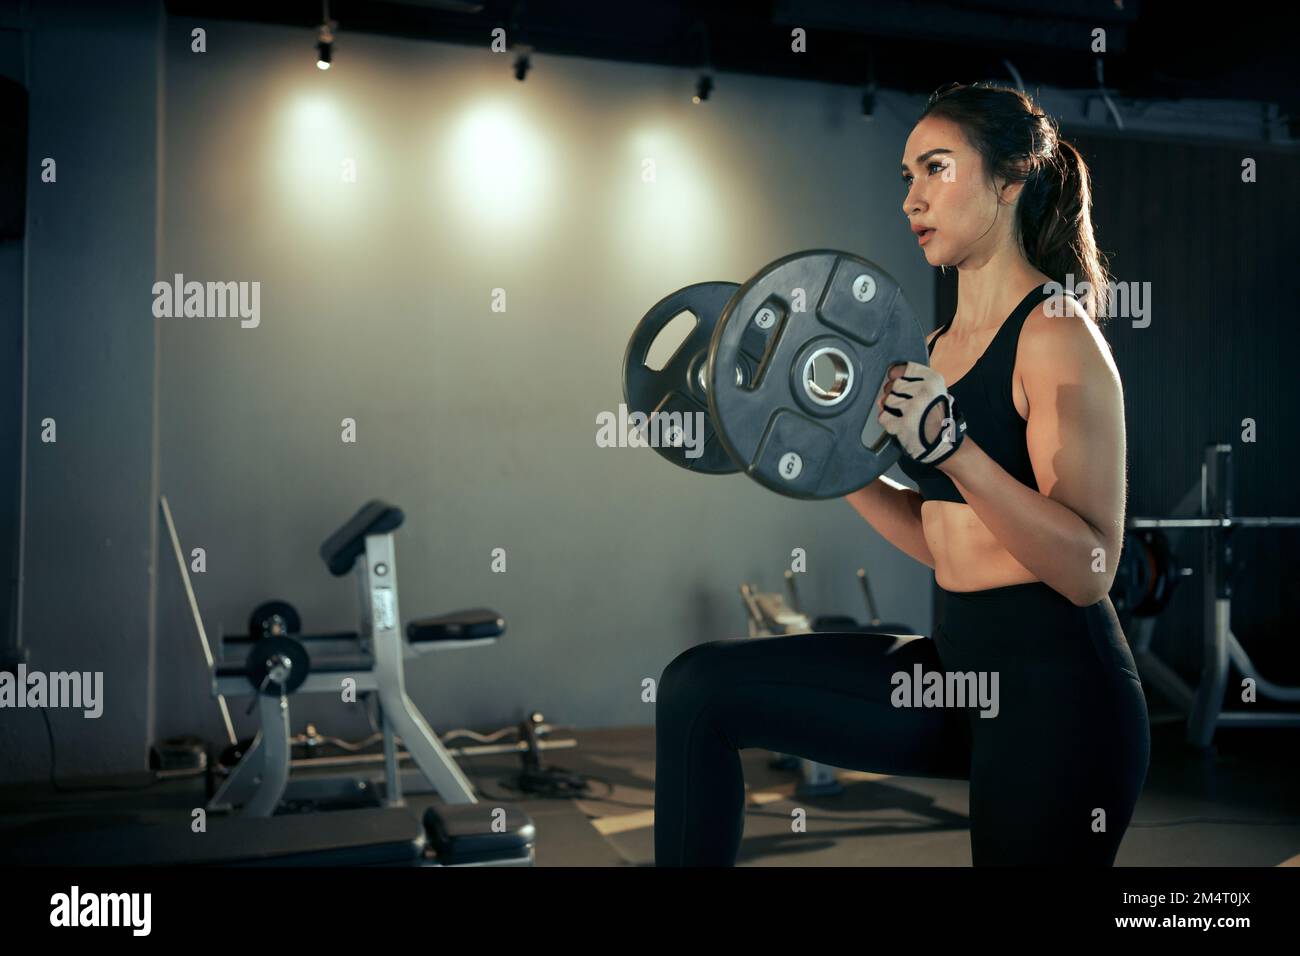 Sporty woman exercising with weight plate in the gym. Stock Photo